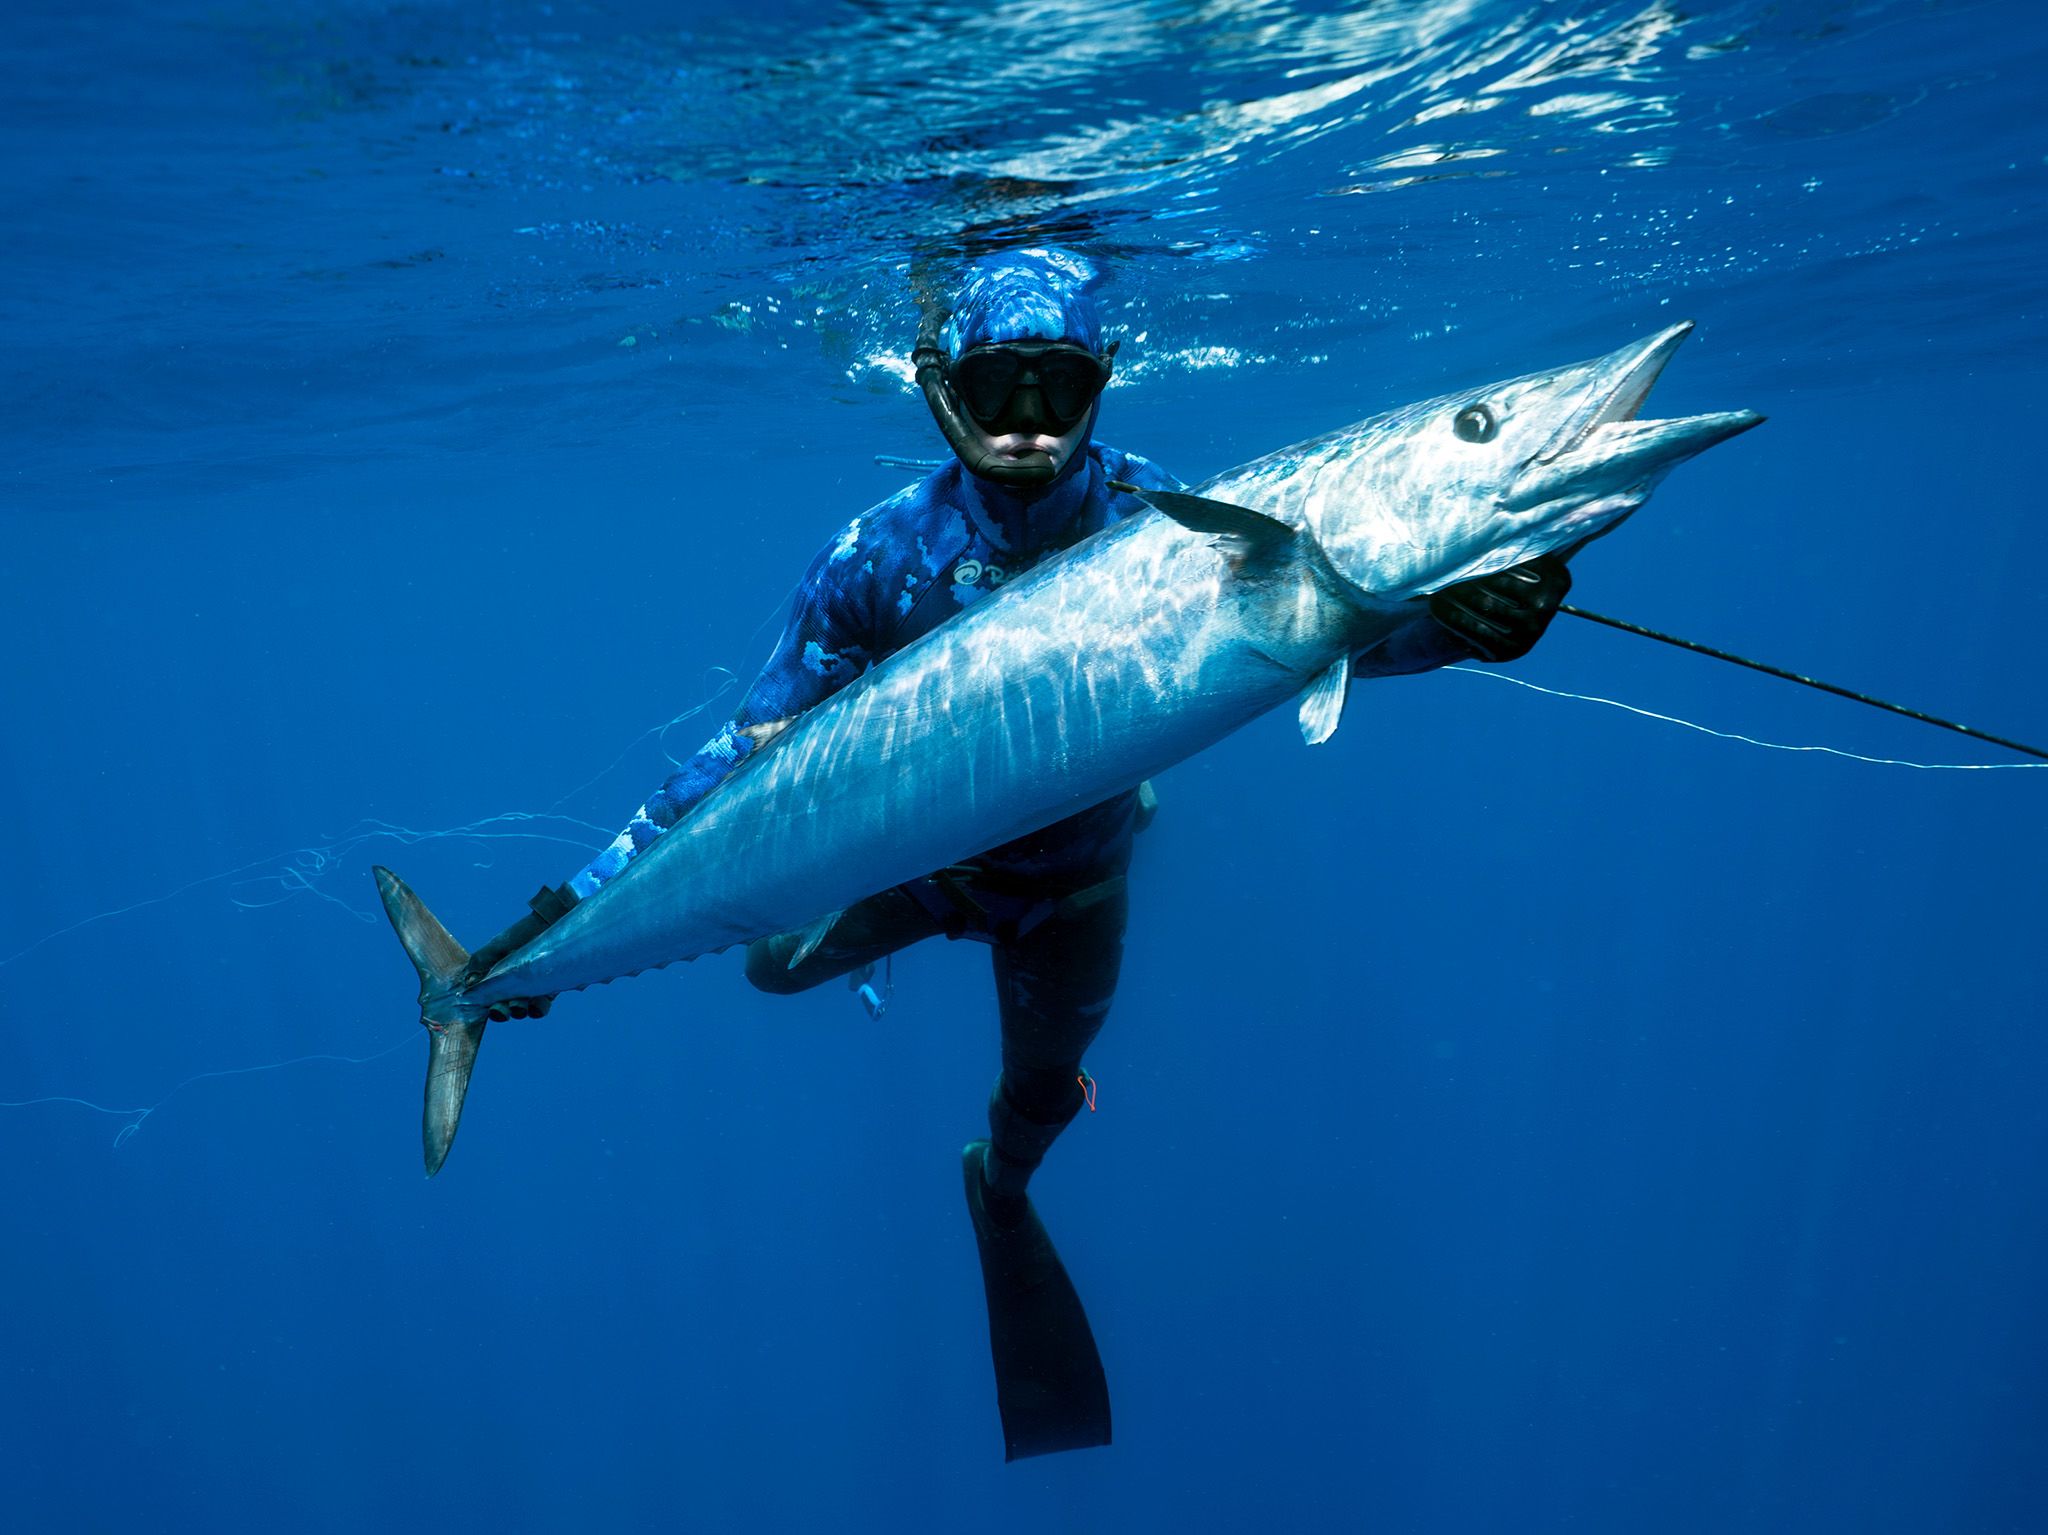 Ascension Island, St Helena:  A spear fishermen in the blue waters of the south Atlantic off of... [Photo of the day - July 2018]